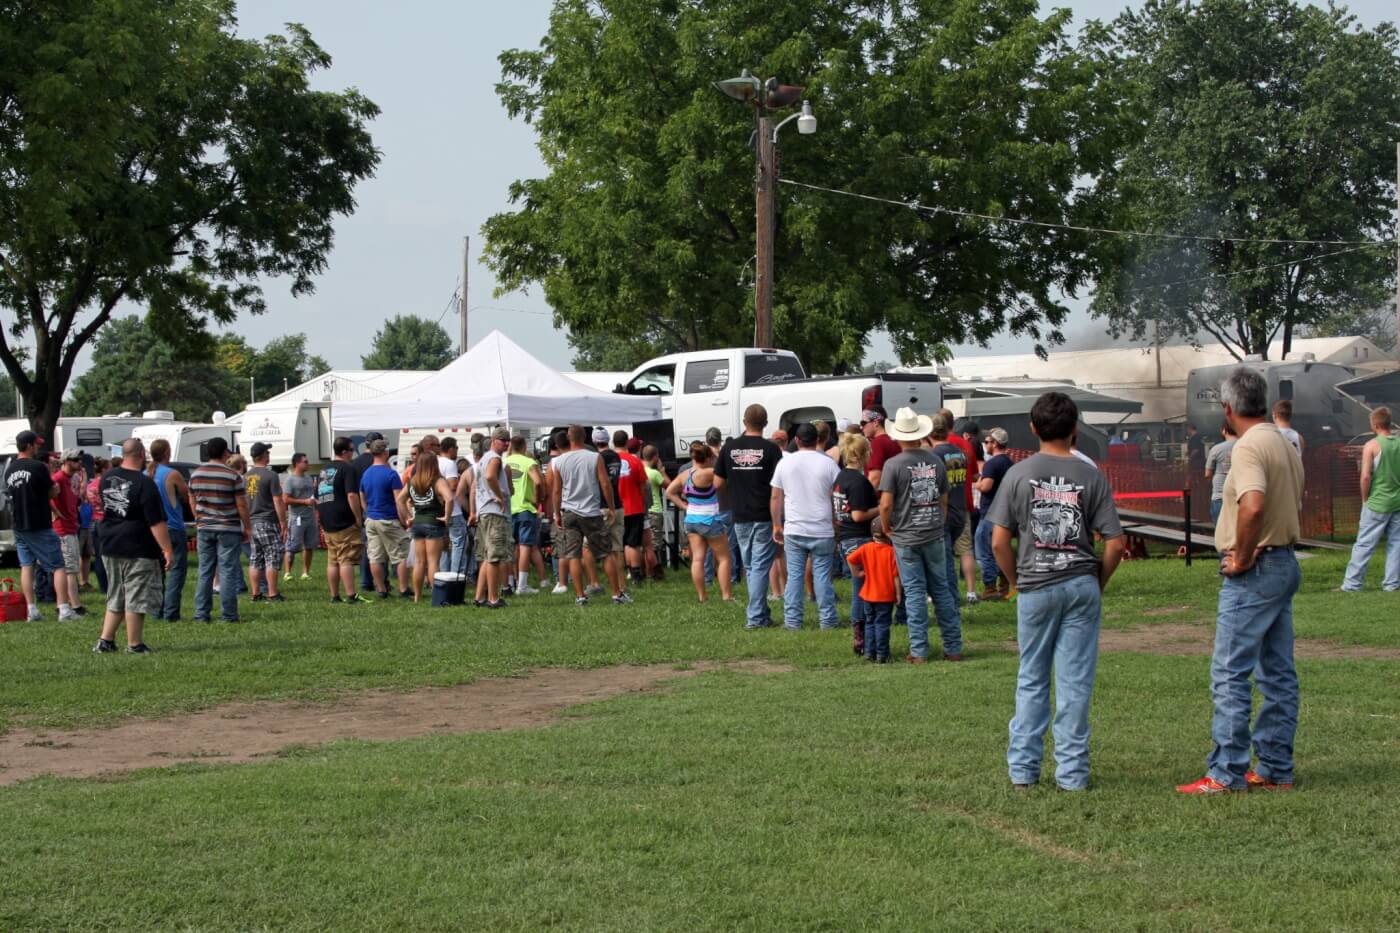 As typical at the Scheid Diesel Extravaganza, the dyno area is popular for spectators wanting to see horsepower testing on display.